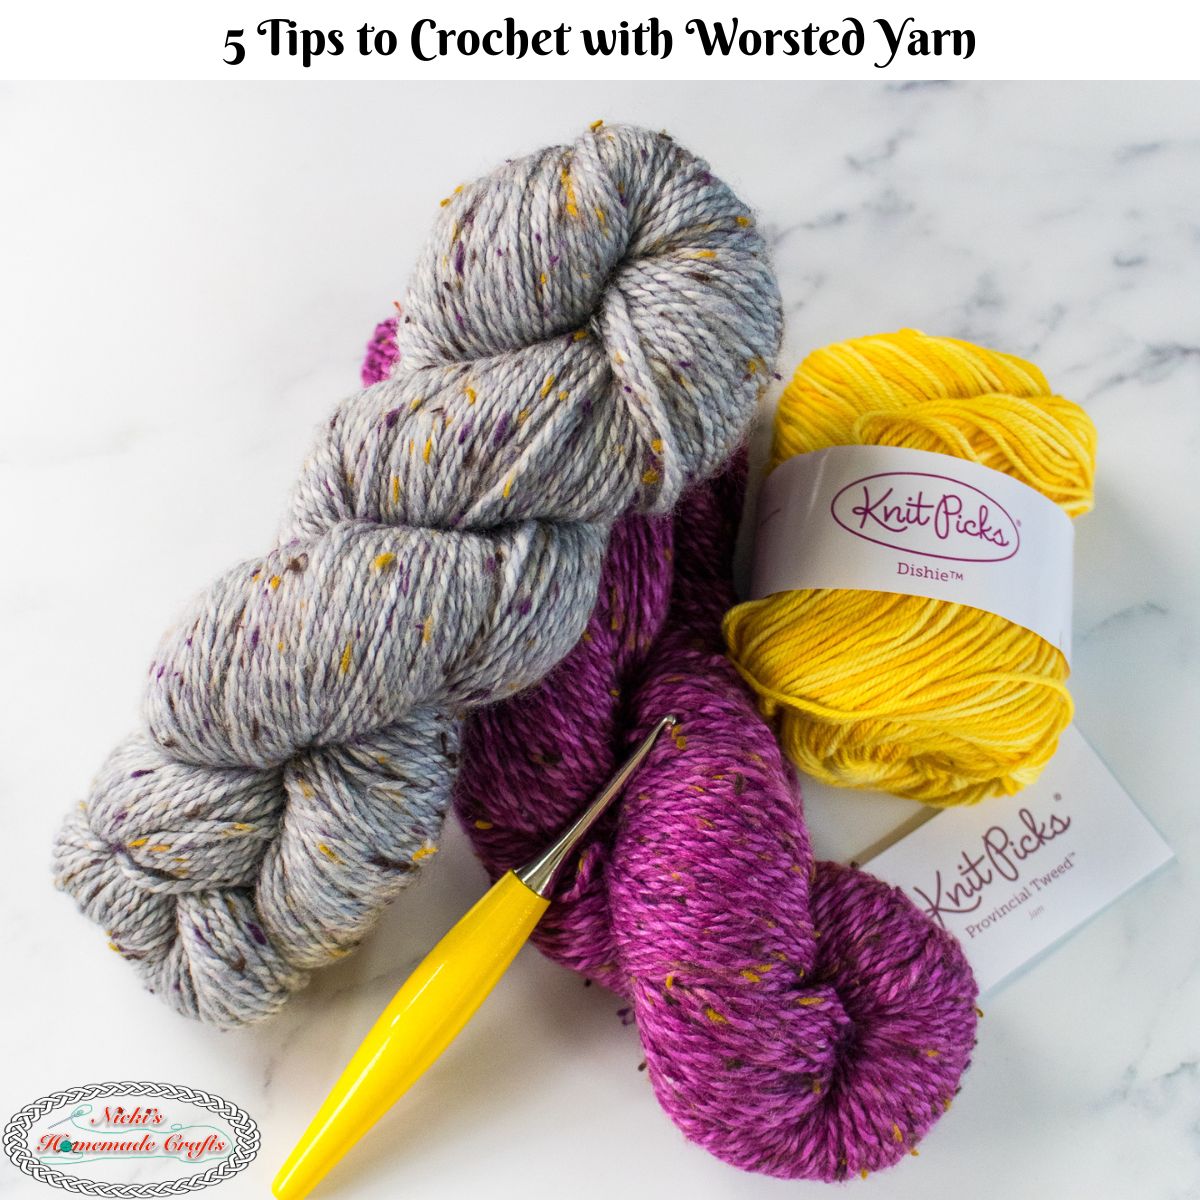 5 Tips on Crocheting with Worsted Weight Yarn - Nicki's Homemade Crafts